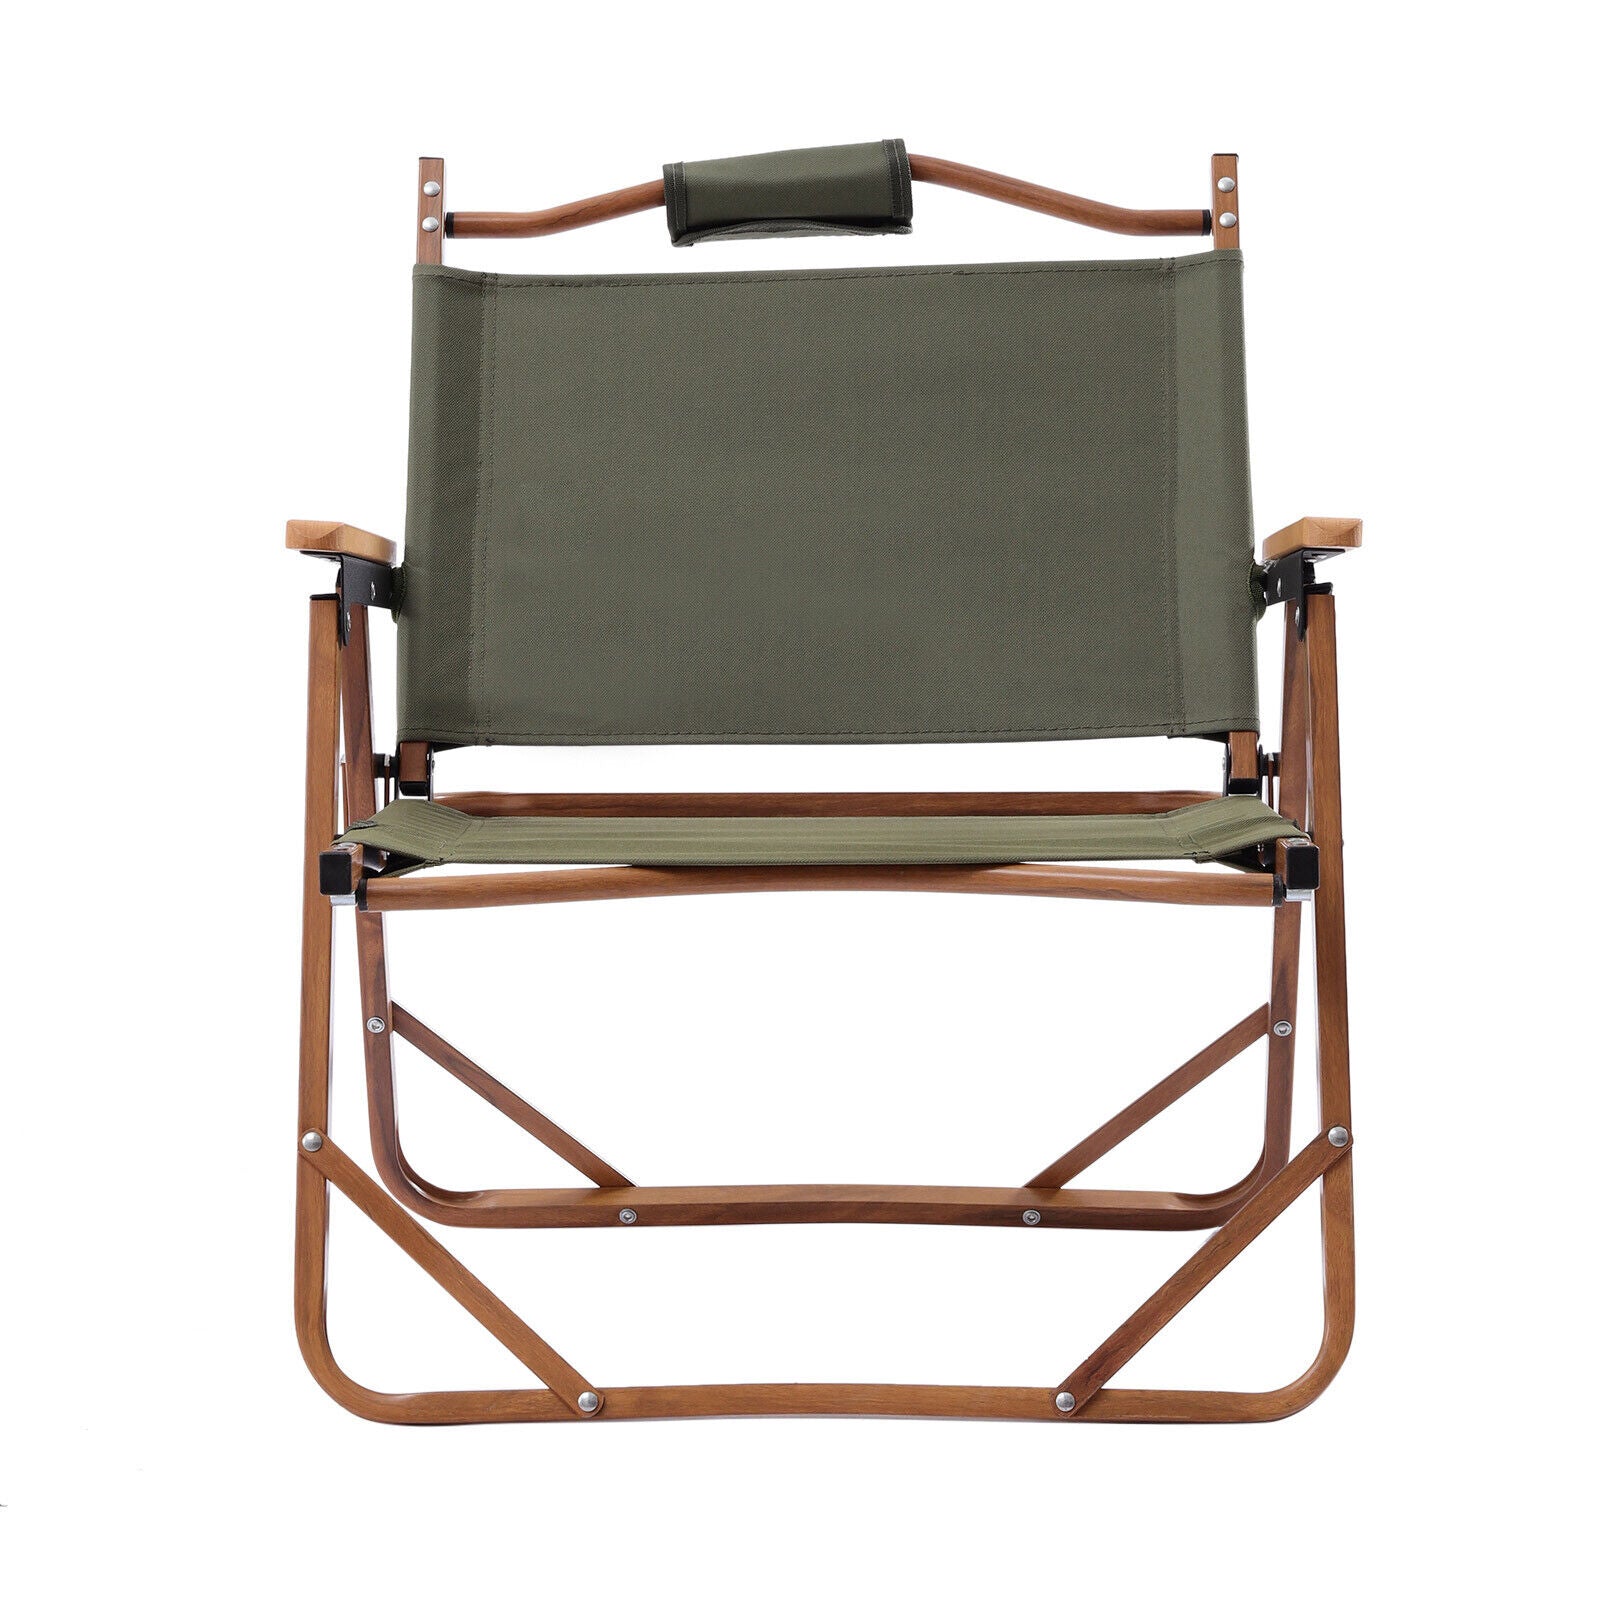 Chairs Outdoor Camping Chair Low Beach Camp Lawn Hiking Folding Fishing Chair